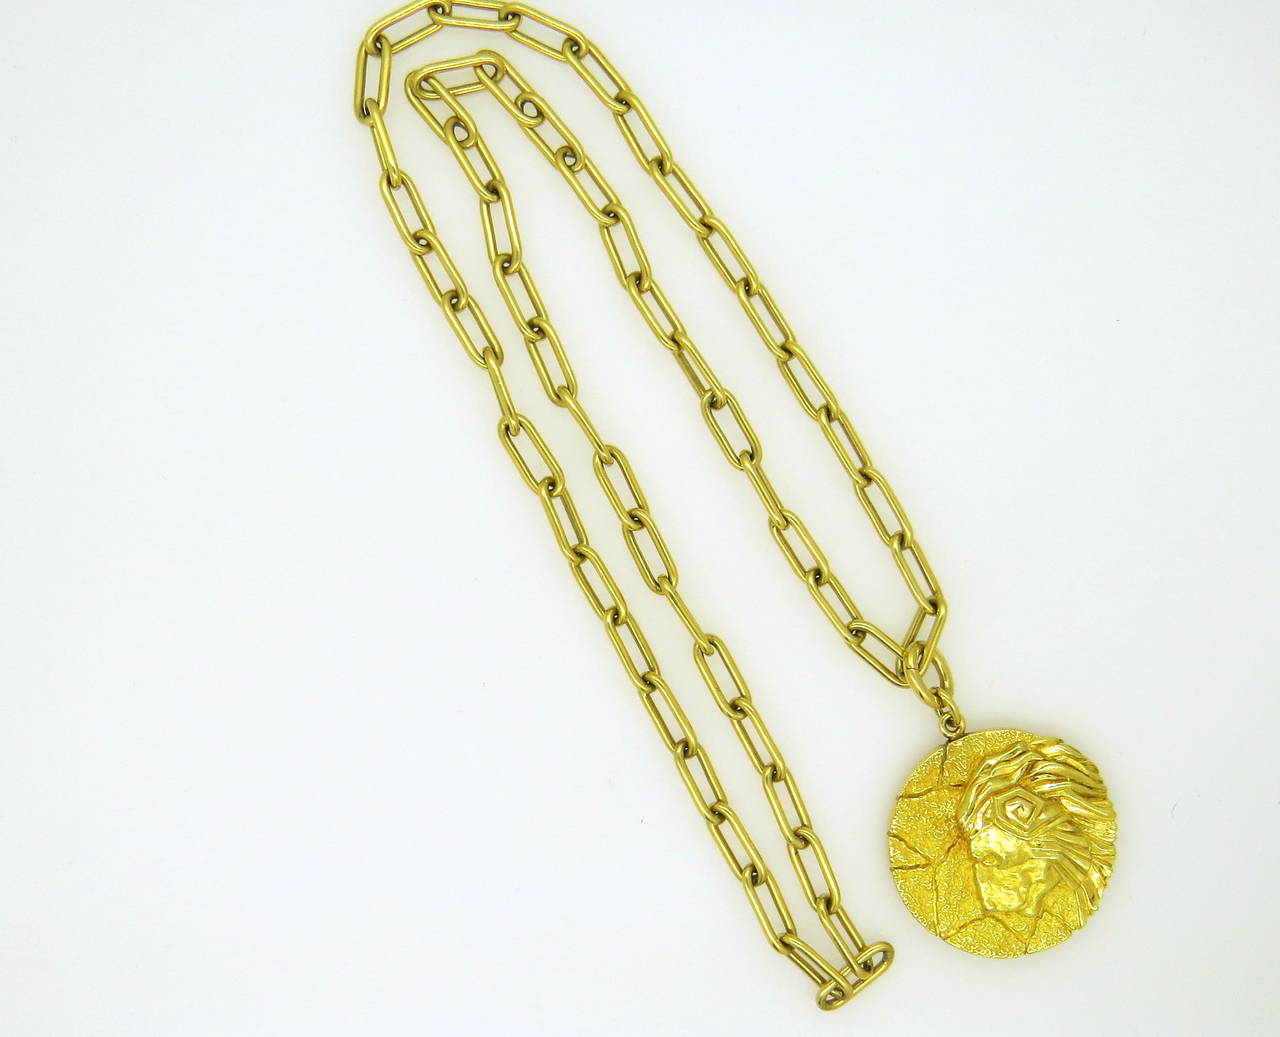 1970s Tiffany& Co circle Leo zodiac sign pendant, measuring 43mm in diameter, suspended on a 30